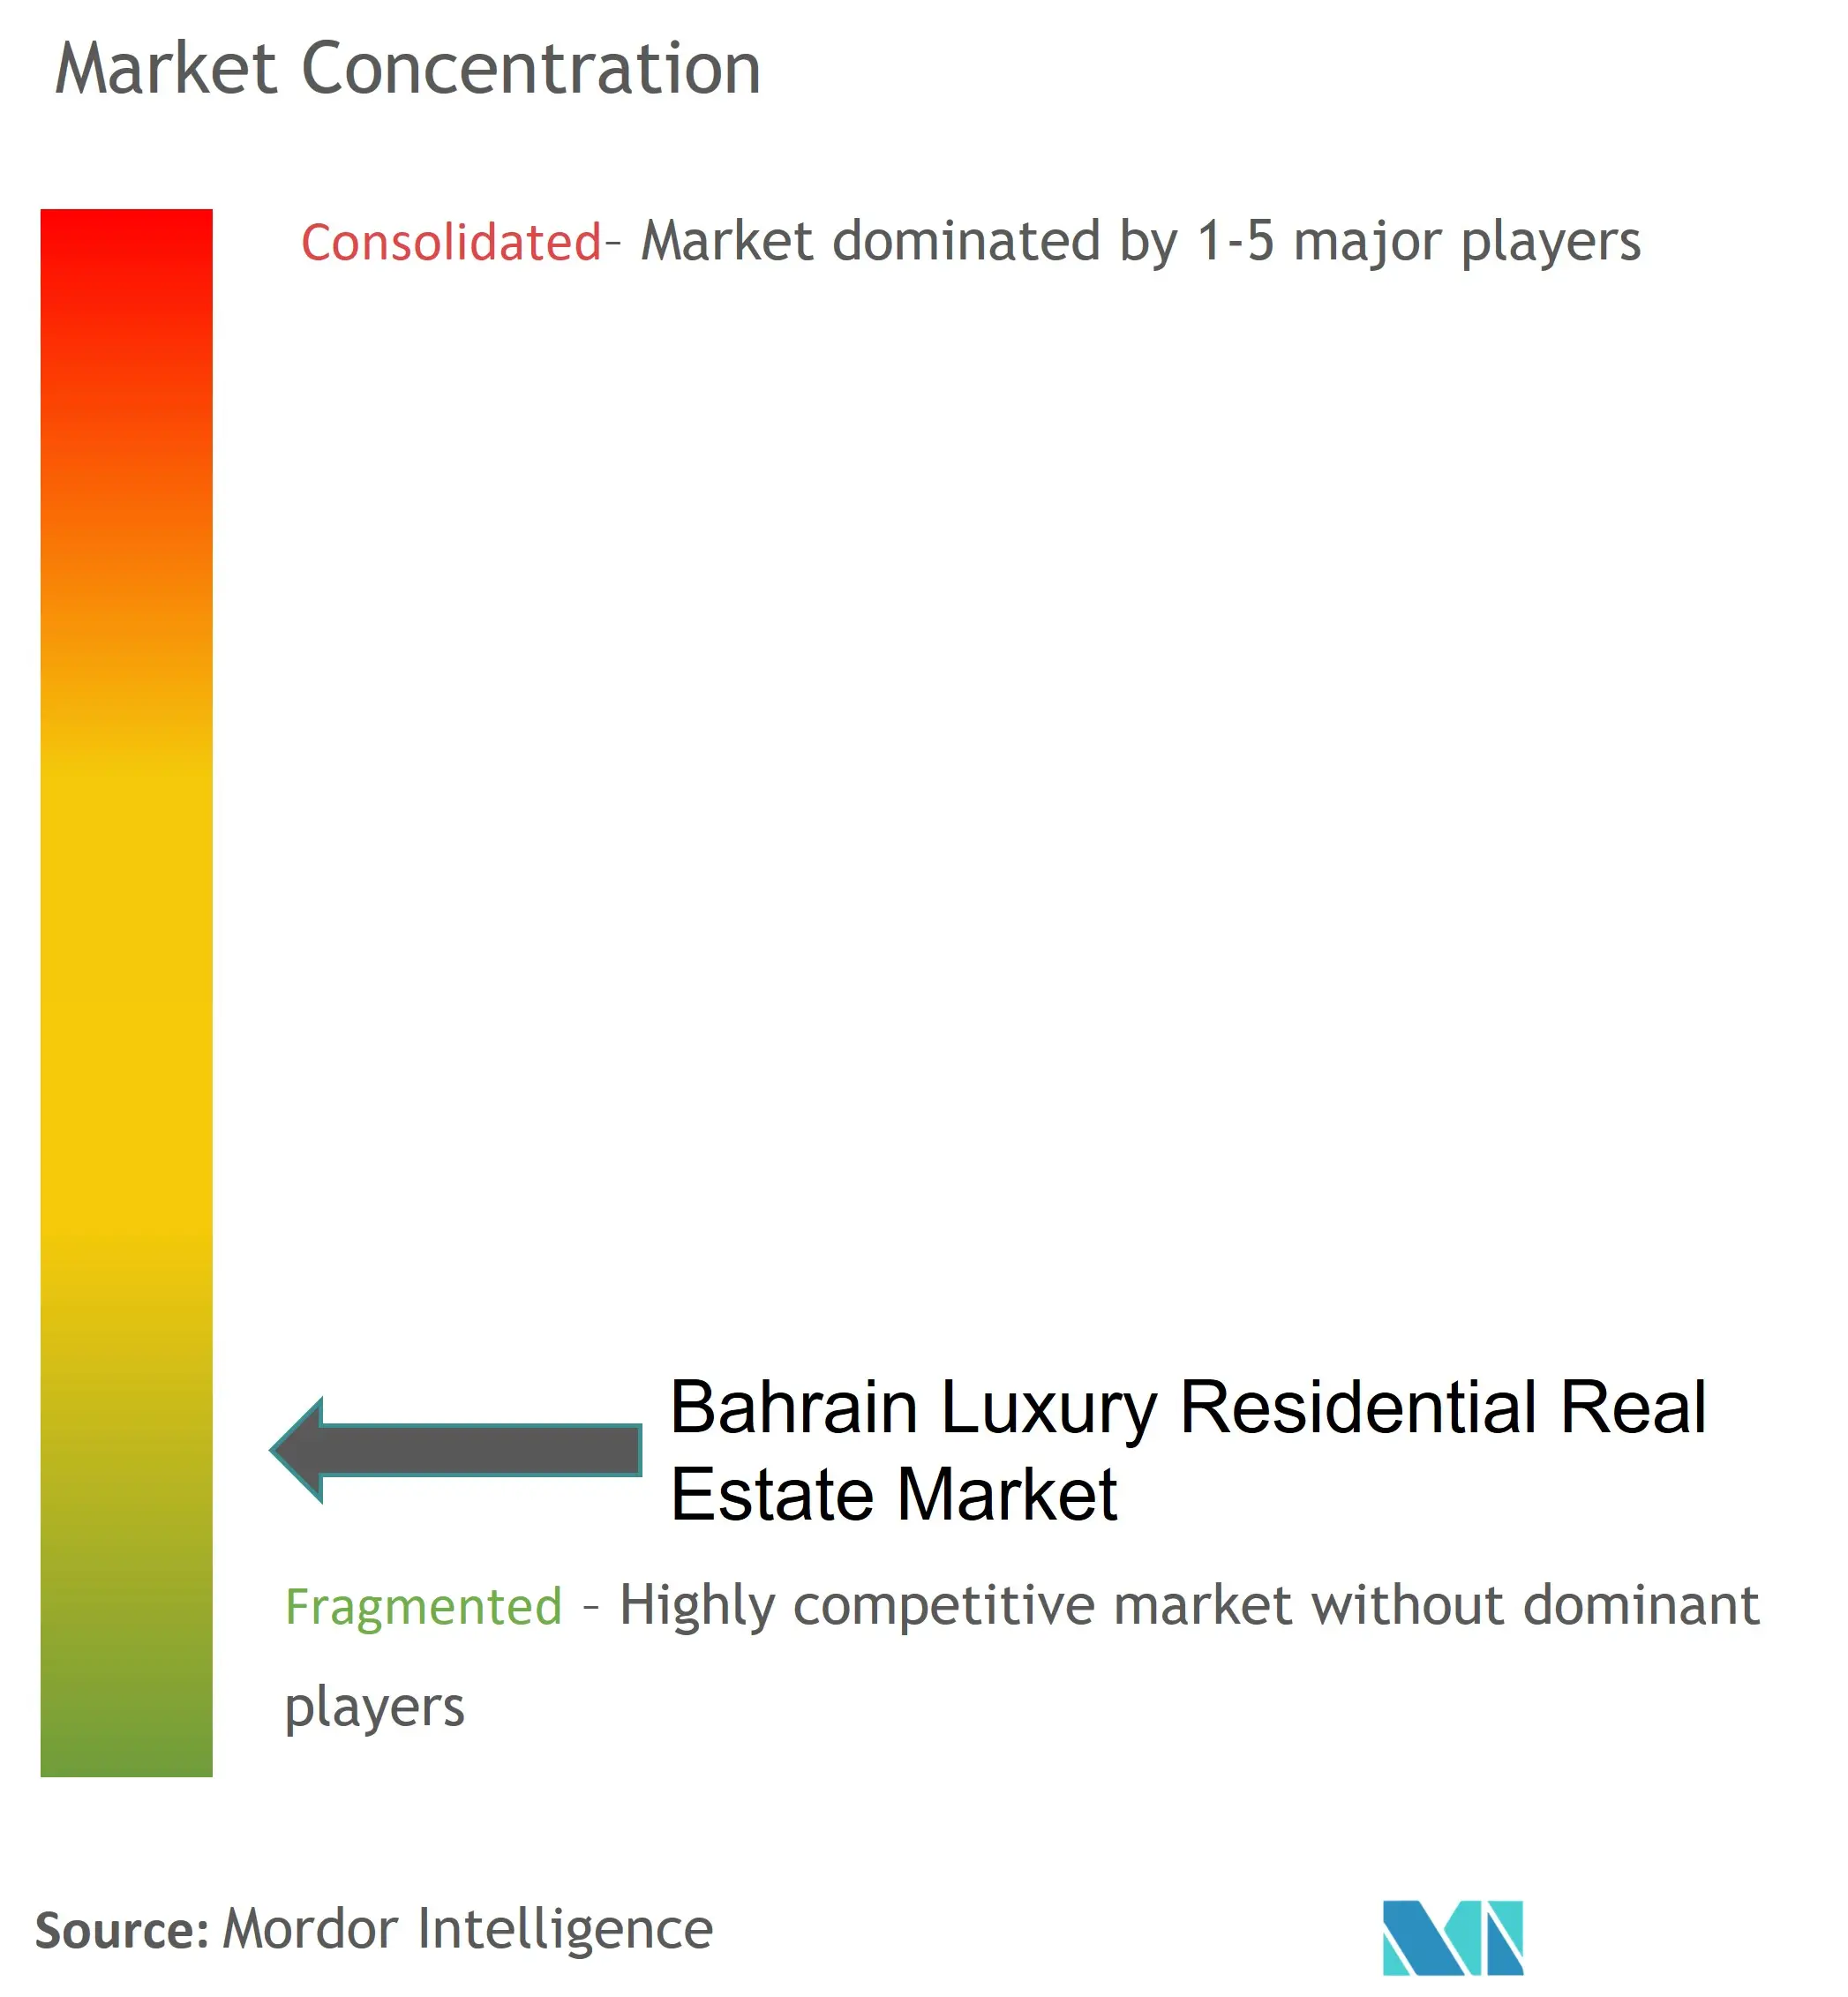 Bahrain Luxury Residential Real Estate Market Concentration